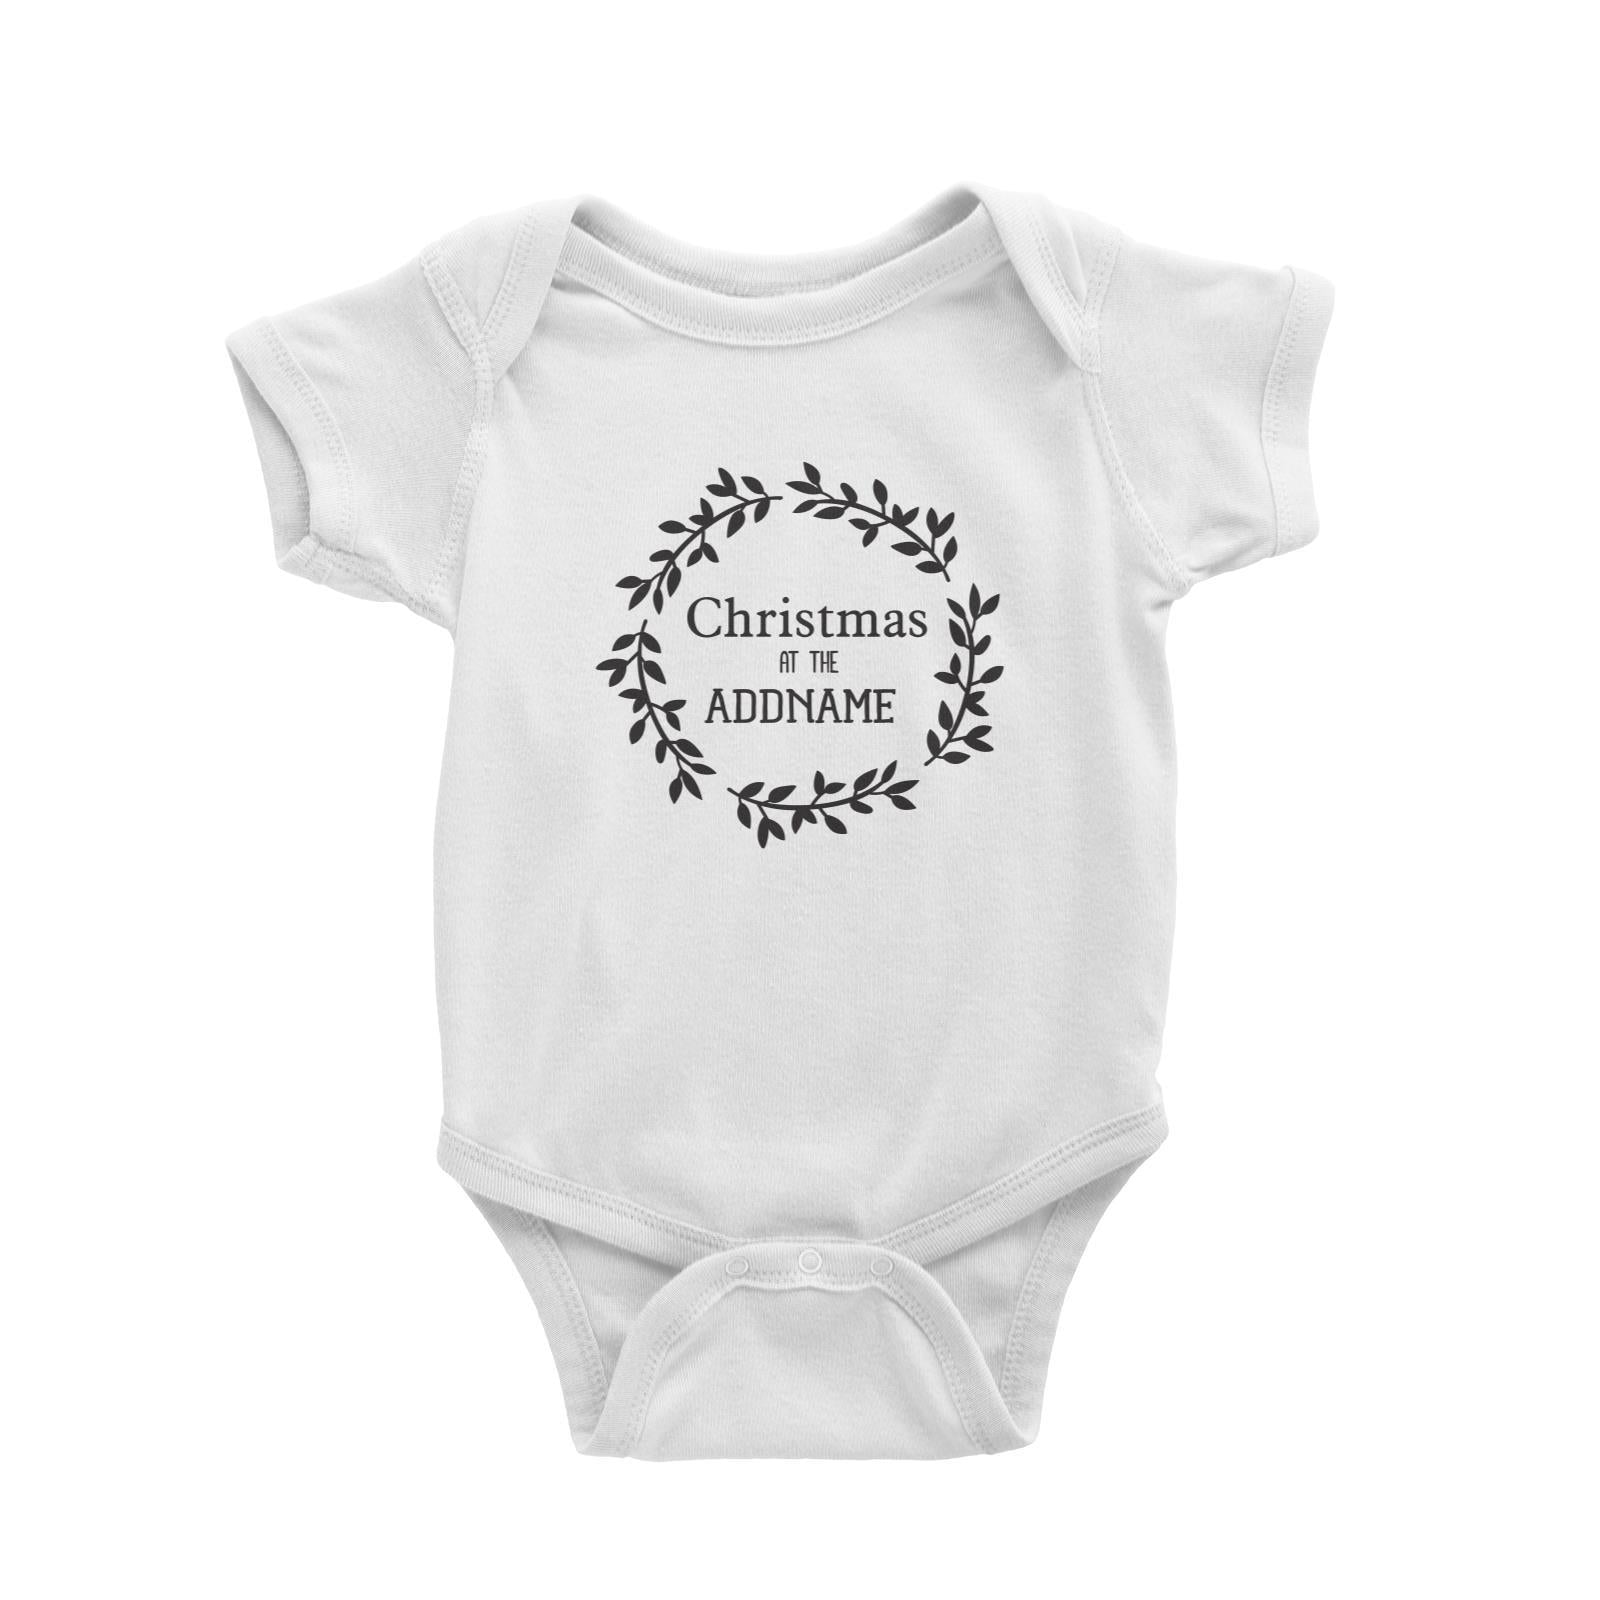 Xmas Christmas At The Flower Wreath Baby Romper